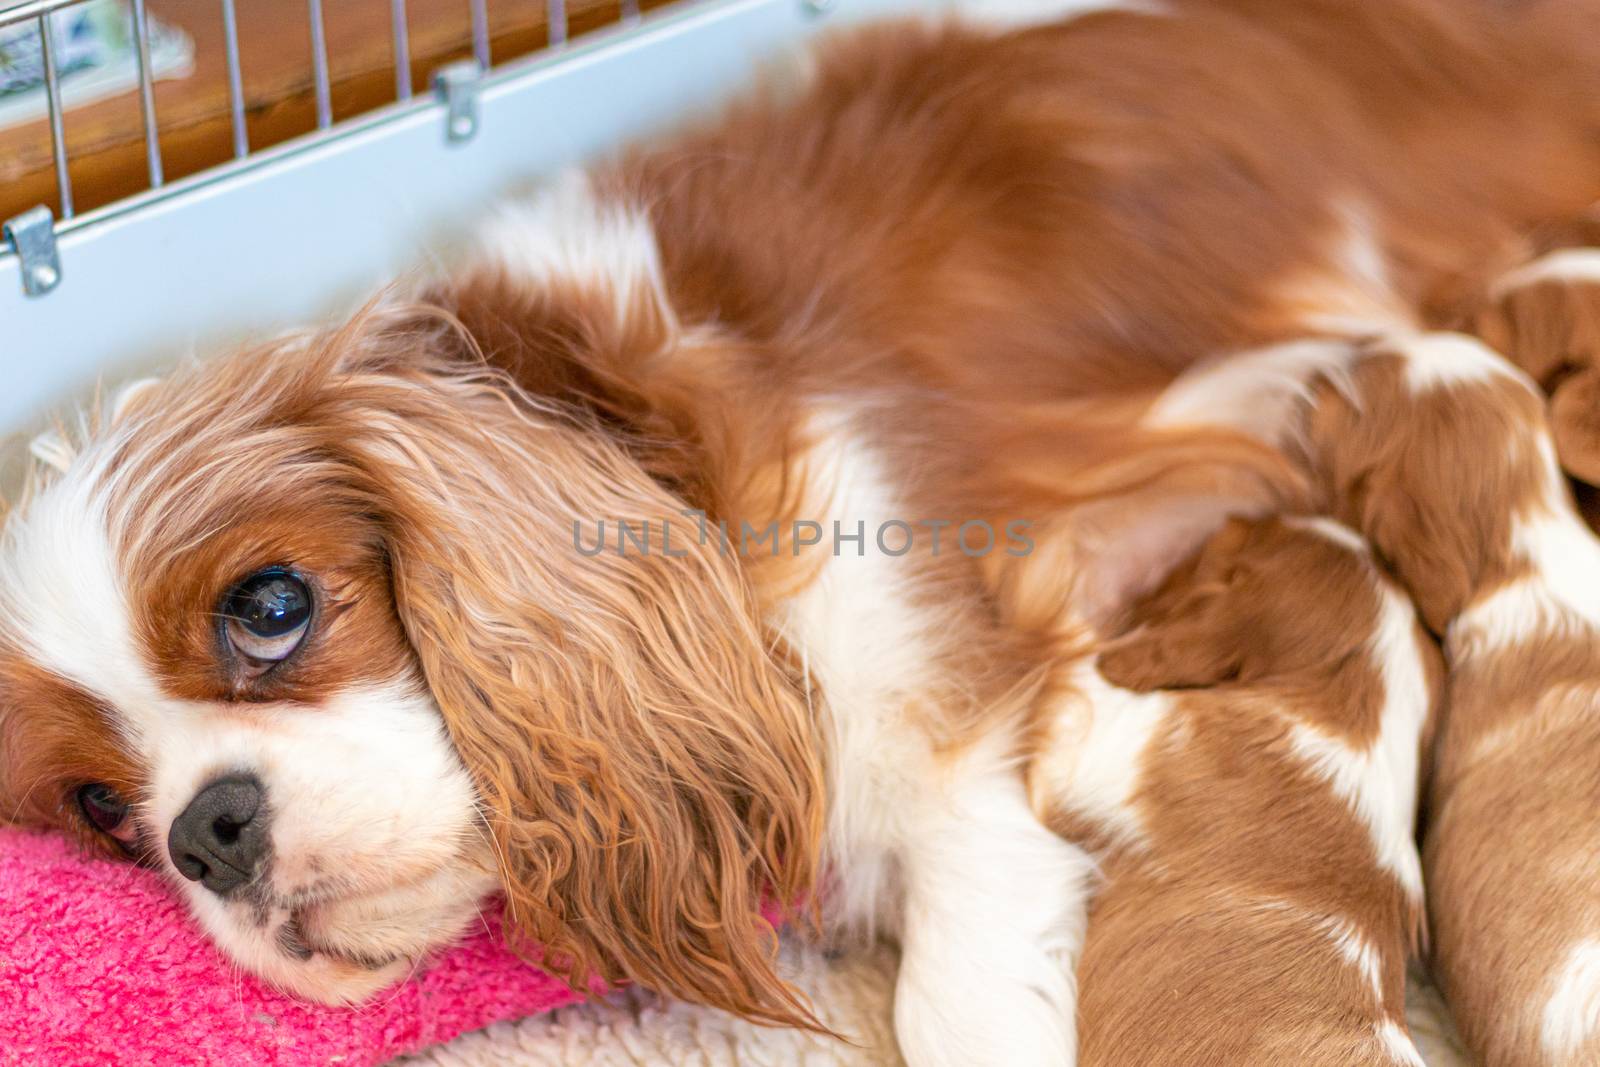 A female Cavalier King Charles Spaniel lies in a dog bed nursing her newborn puppies. The mother rests her head on a pink pillow for the feeding, as the babies help themselves to her milk.